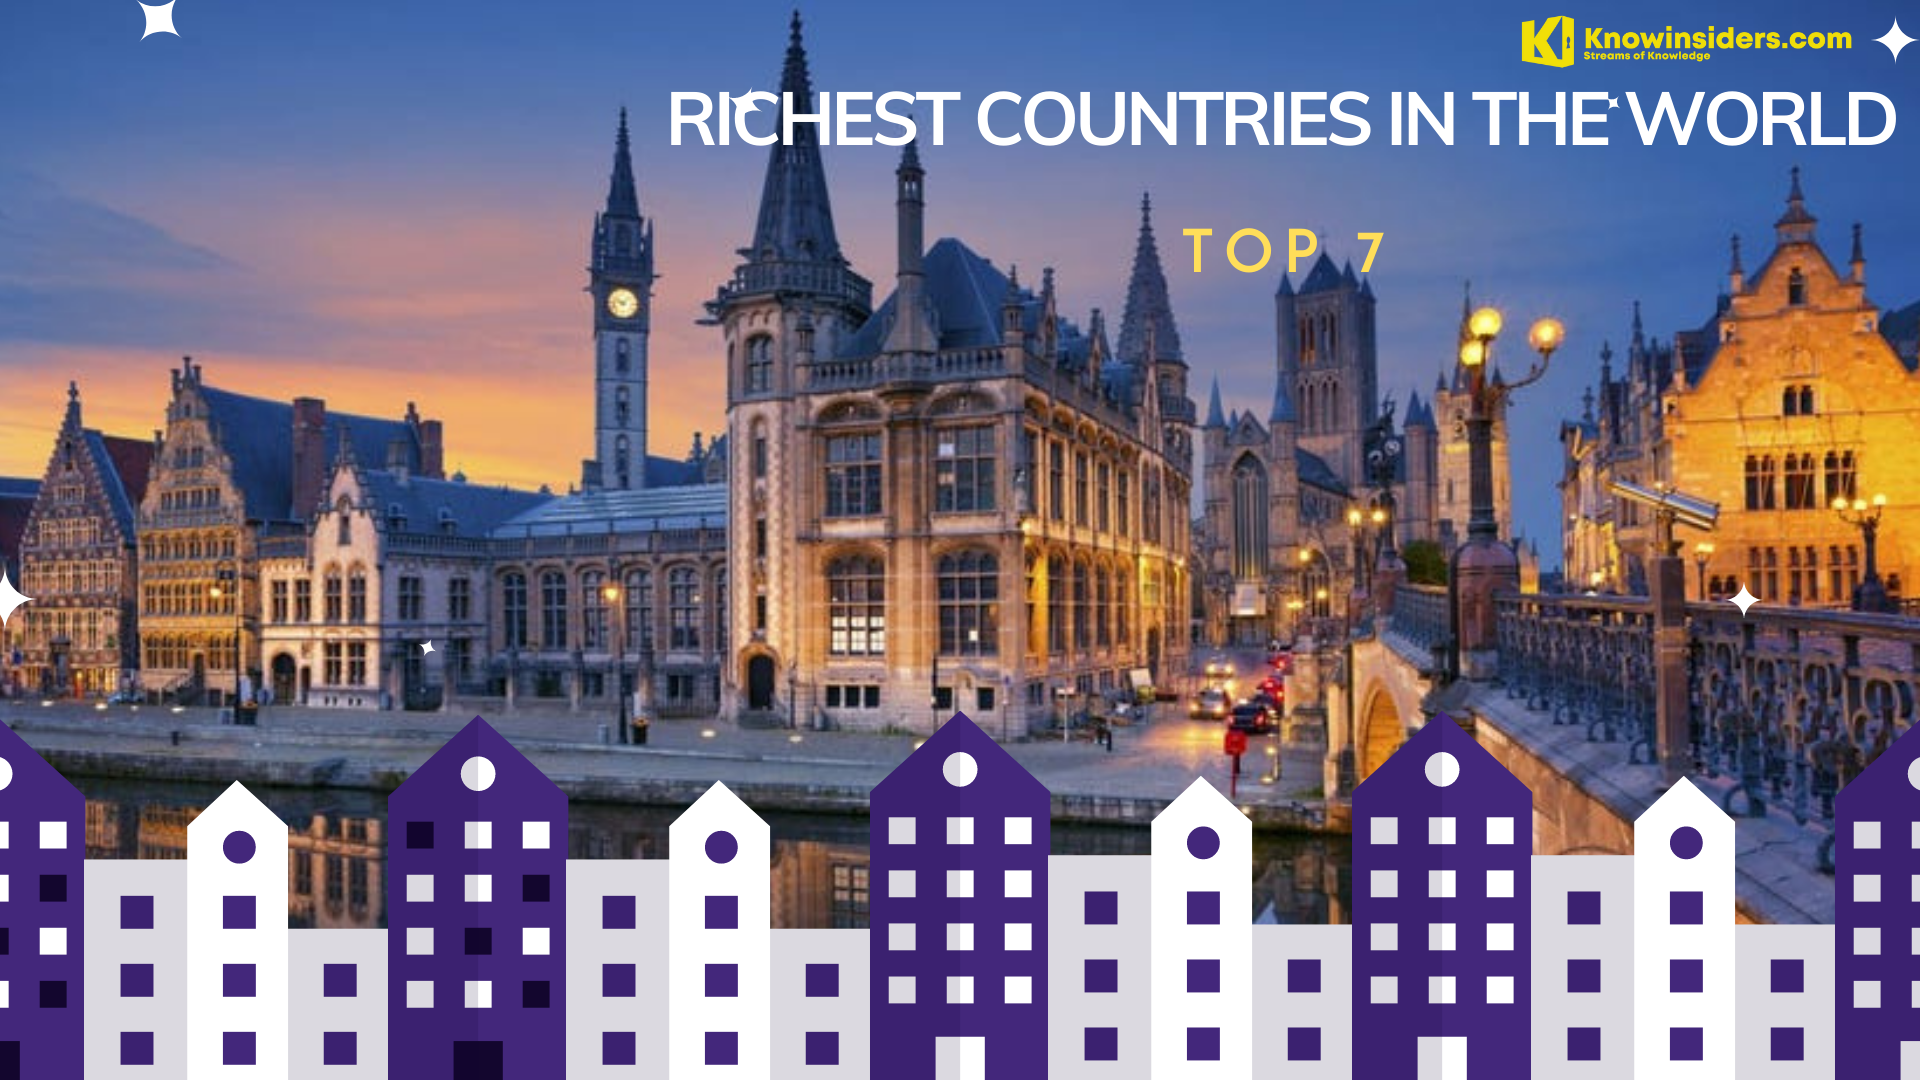 7 Richest Countries In The World by GDP Per Capita